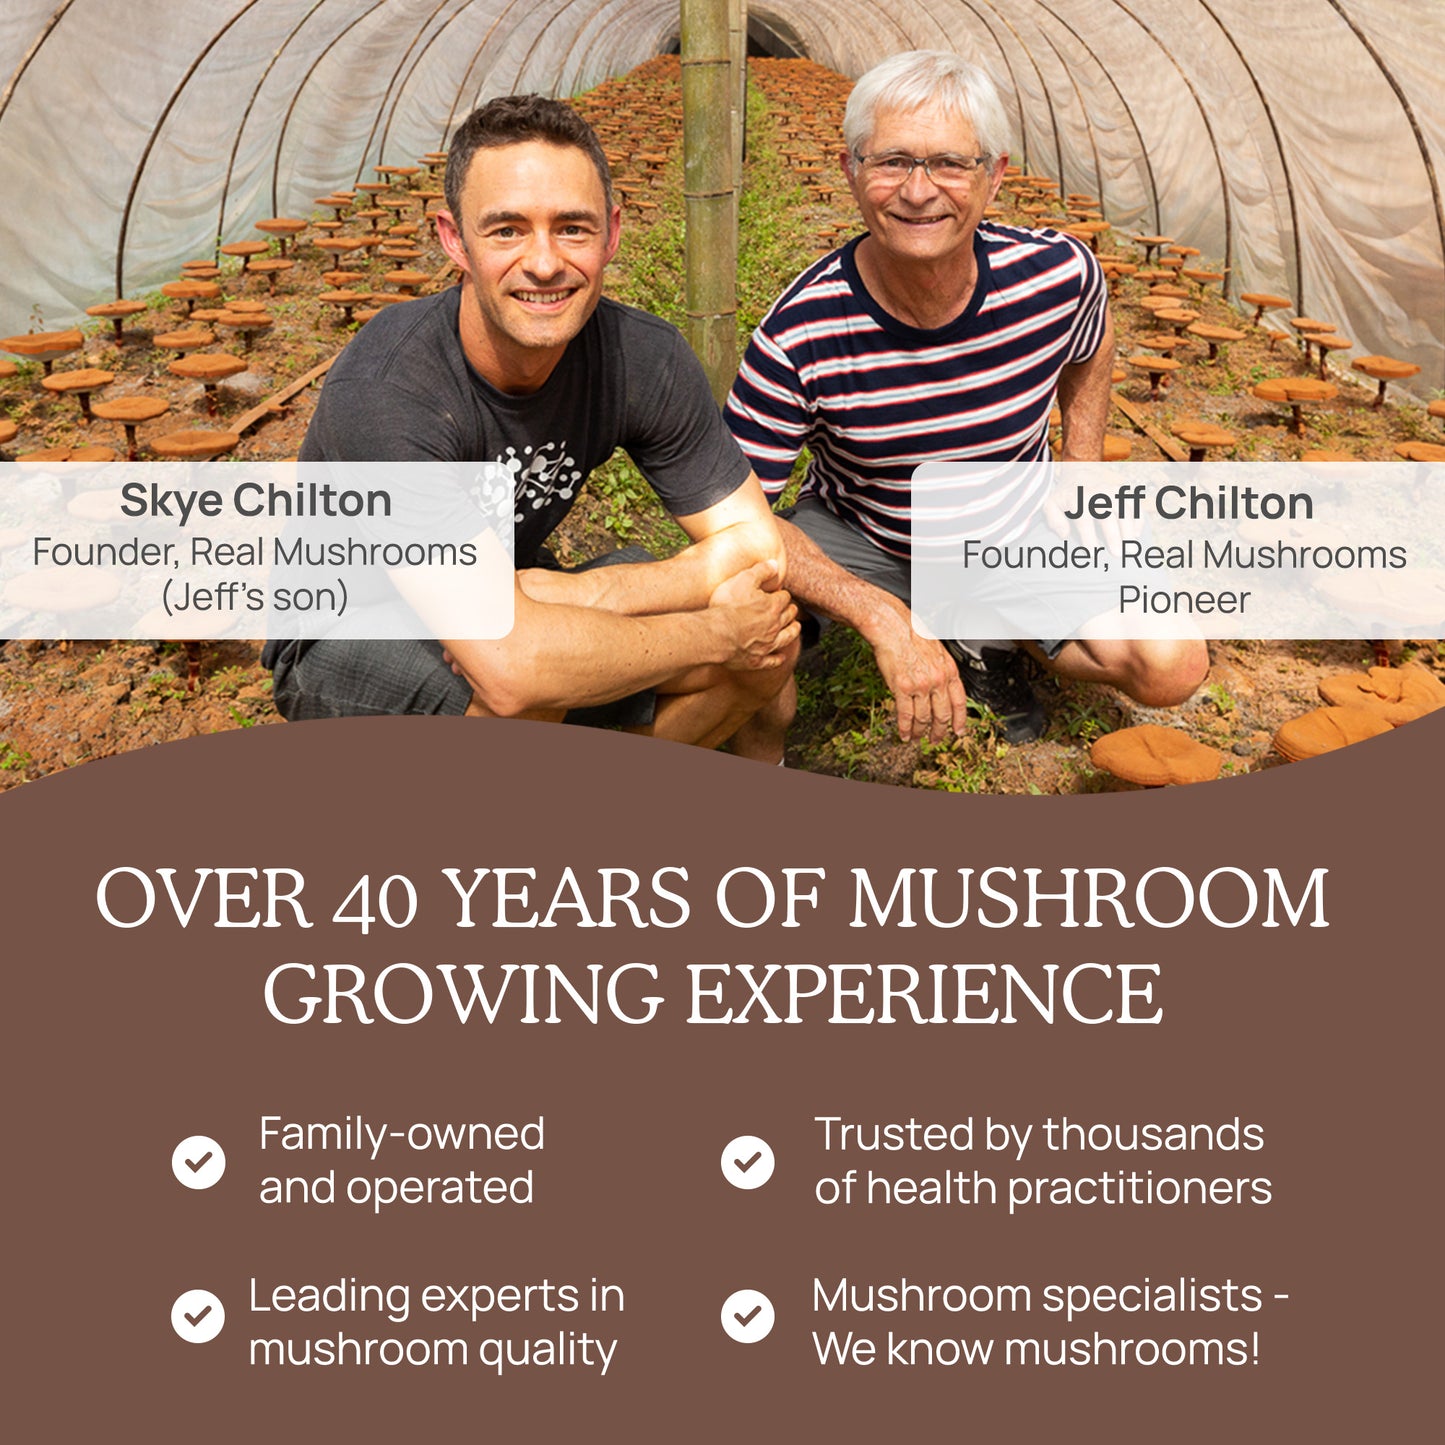 Two men smiling inside an organic mushroom growing facility, representing over 40 years of experience in mushroom cultivation and expertise with Real Mushrooms Mushroom Hot Chocolate Mix.